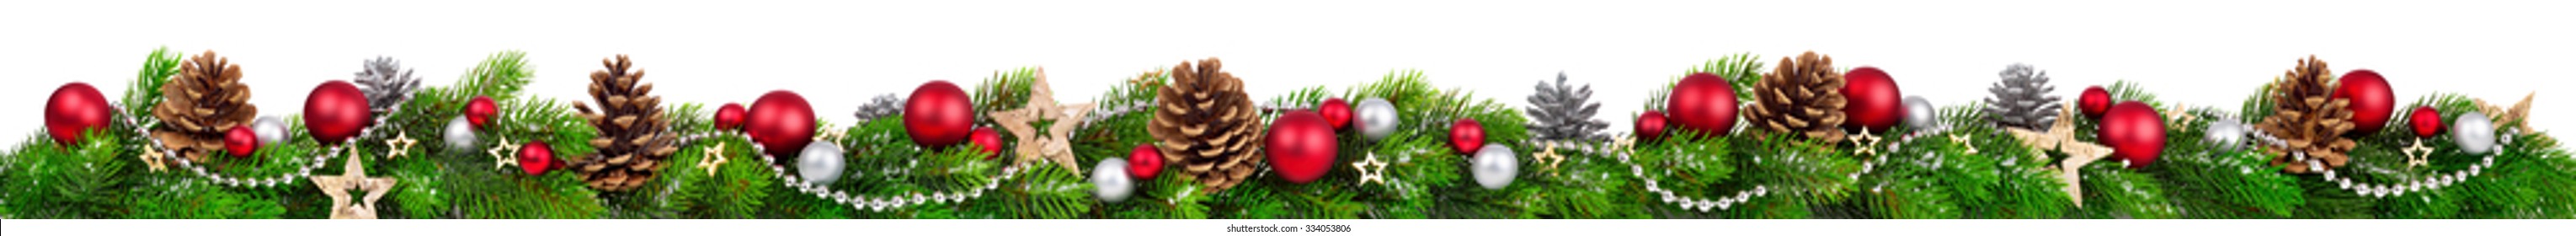 Extra wide Christmas border with fir branches, red and silver baubles, pine cones and other ornaments, isolated on white